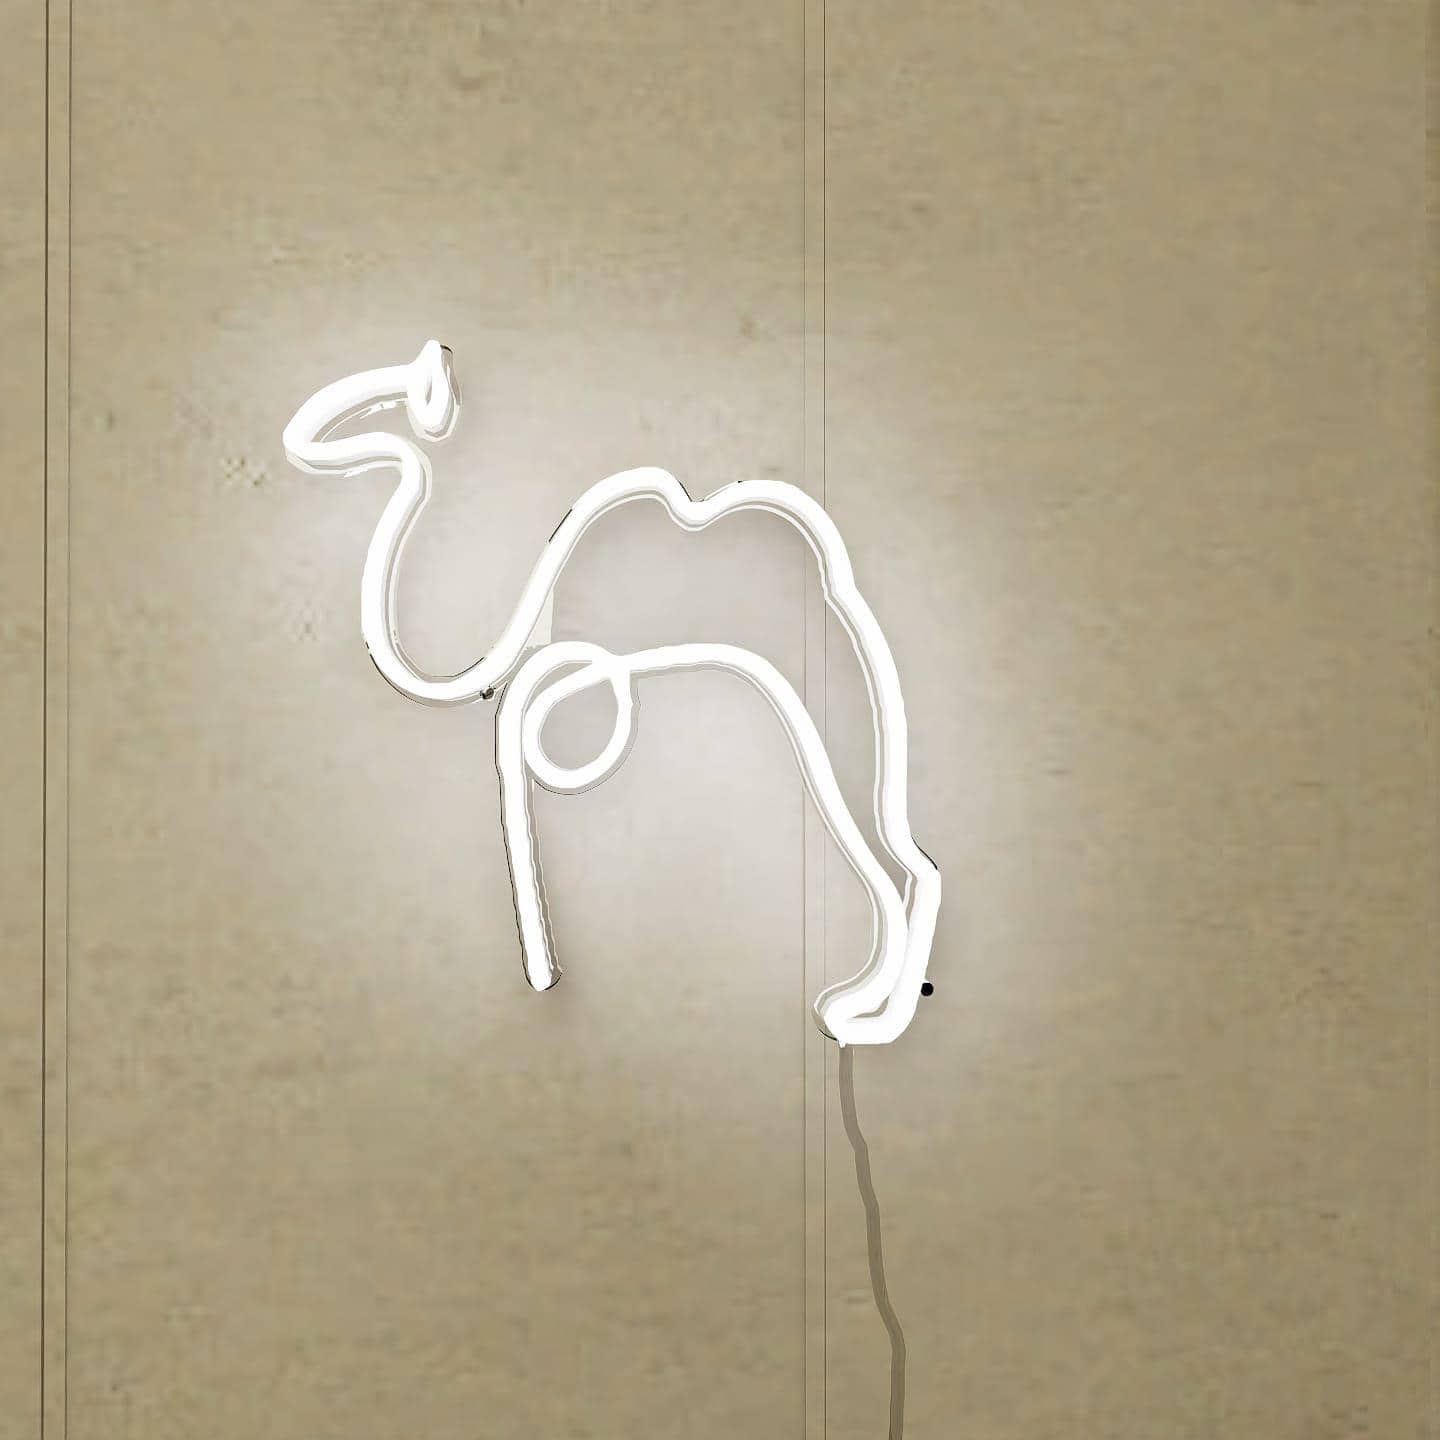 An abstract neon sign featuring a camel in a vibrant orange hue.